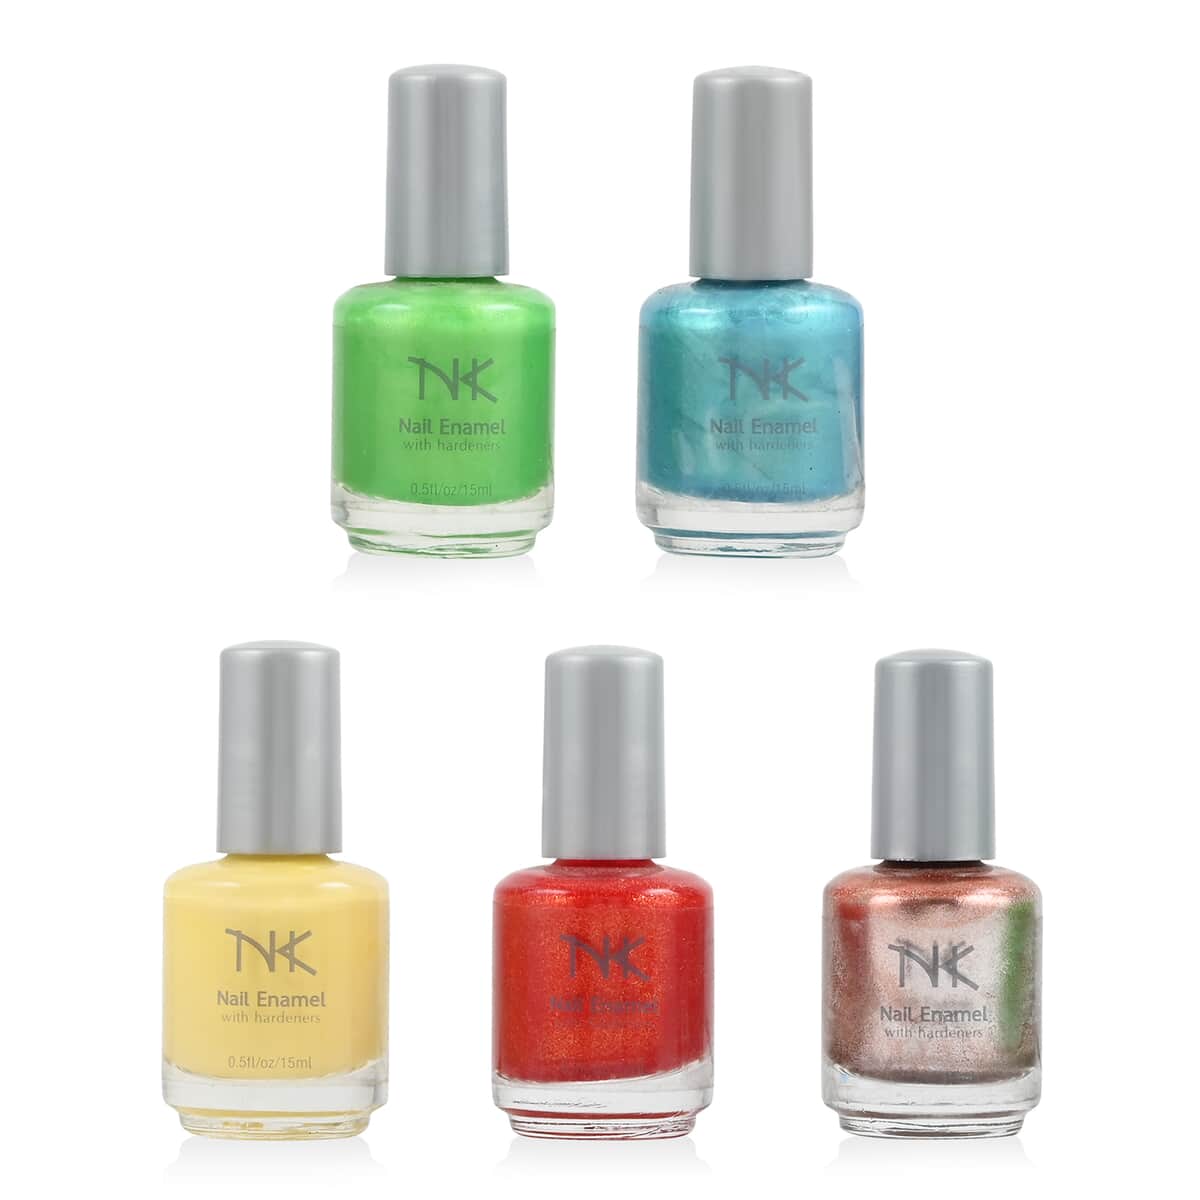 Set of 5 Nail Enamel and Hardener Nail Polish (Assorted Colors) image number 0